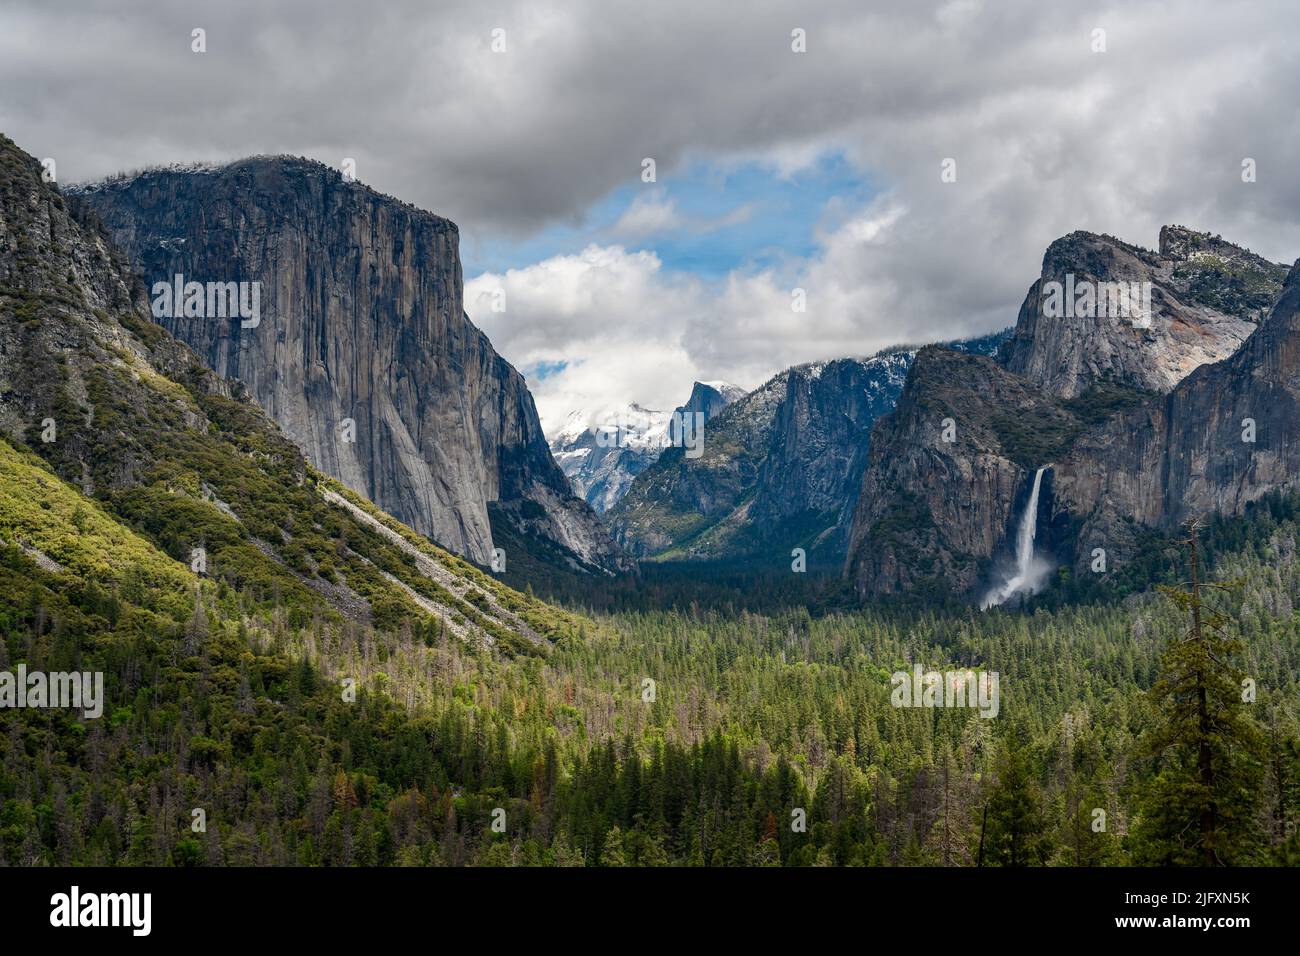 A Mesmerizing scene of El Capitan rocky mountain with snow and blue cloudy  sky Stock Photo